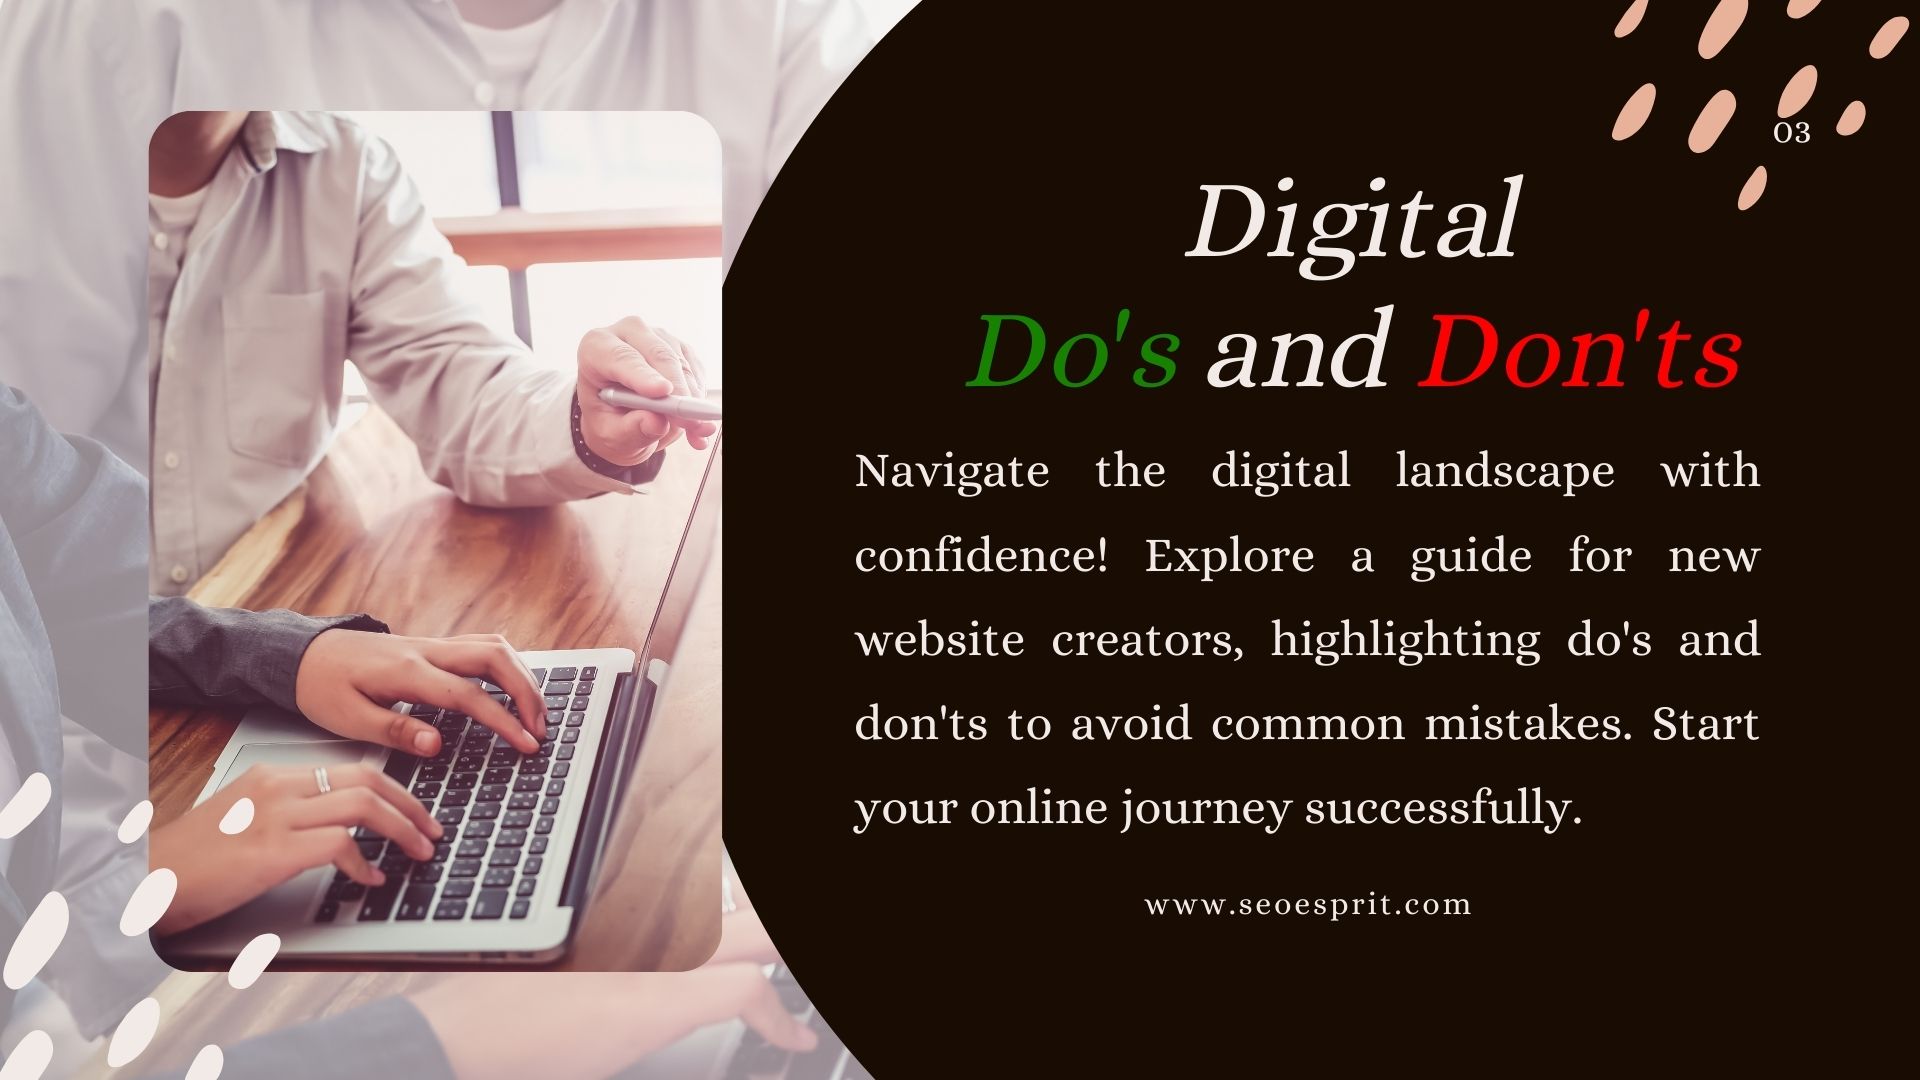 Digital Do’s and Don’ts